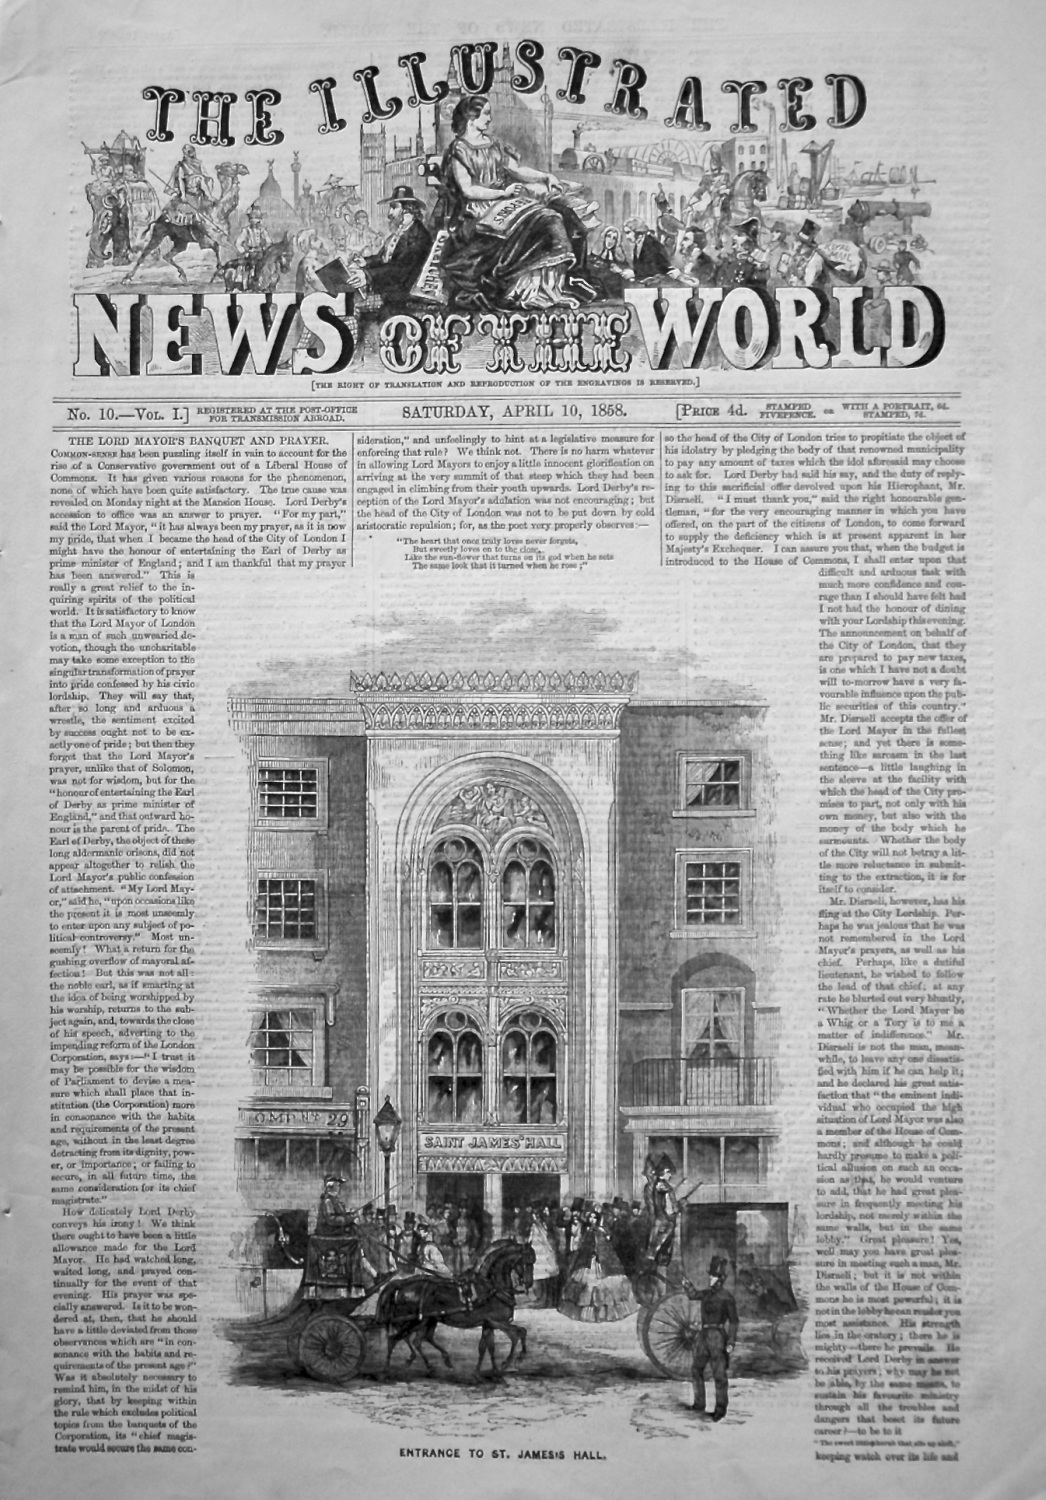 The Illustrated News of the World, April 10th, 1858.